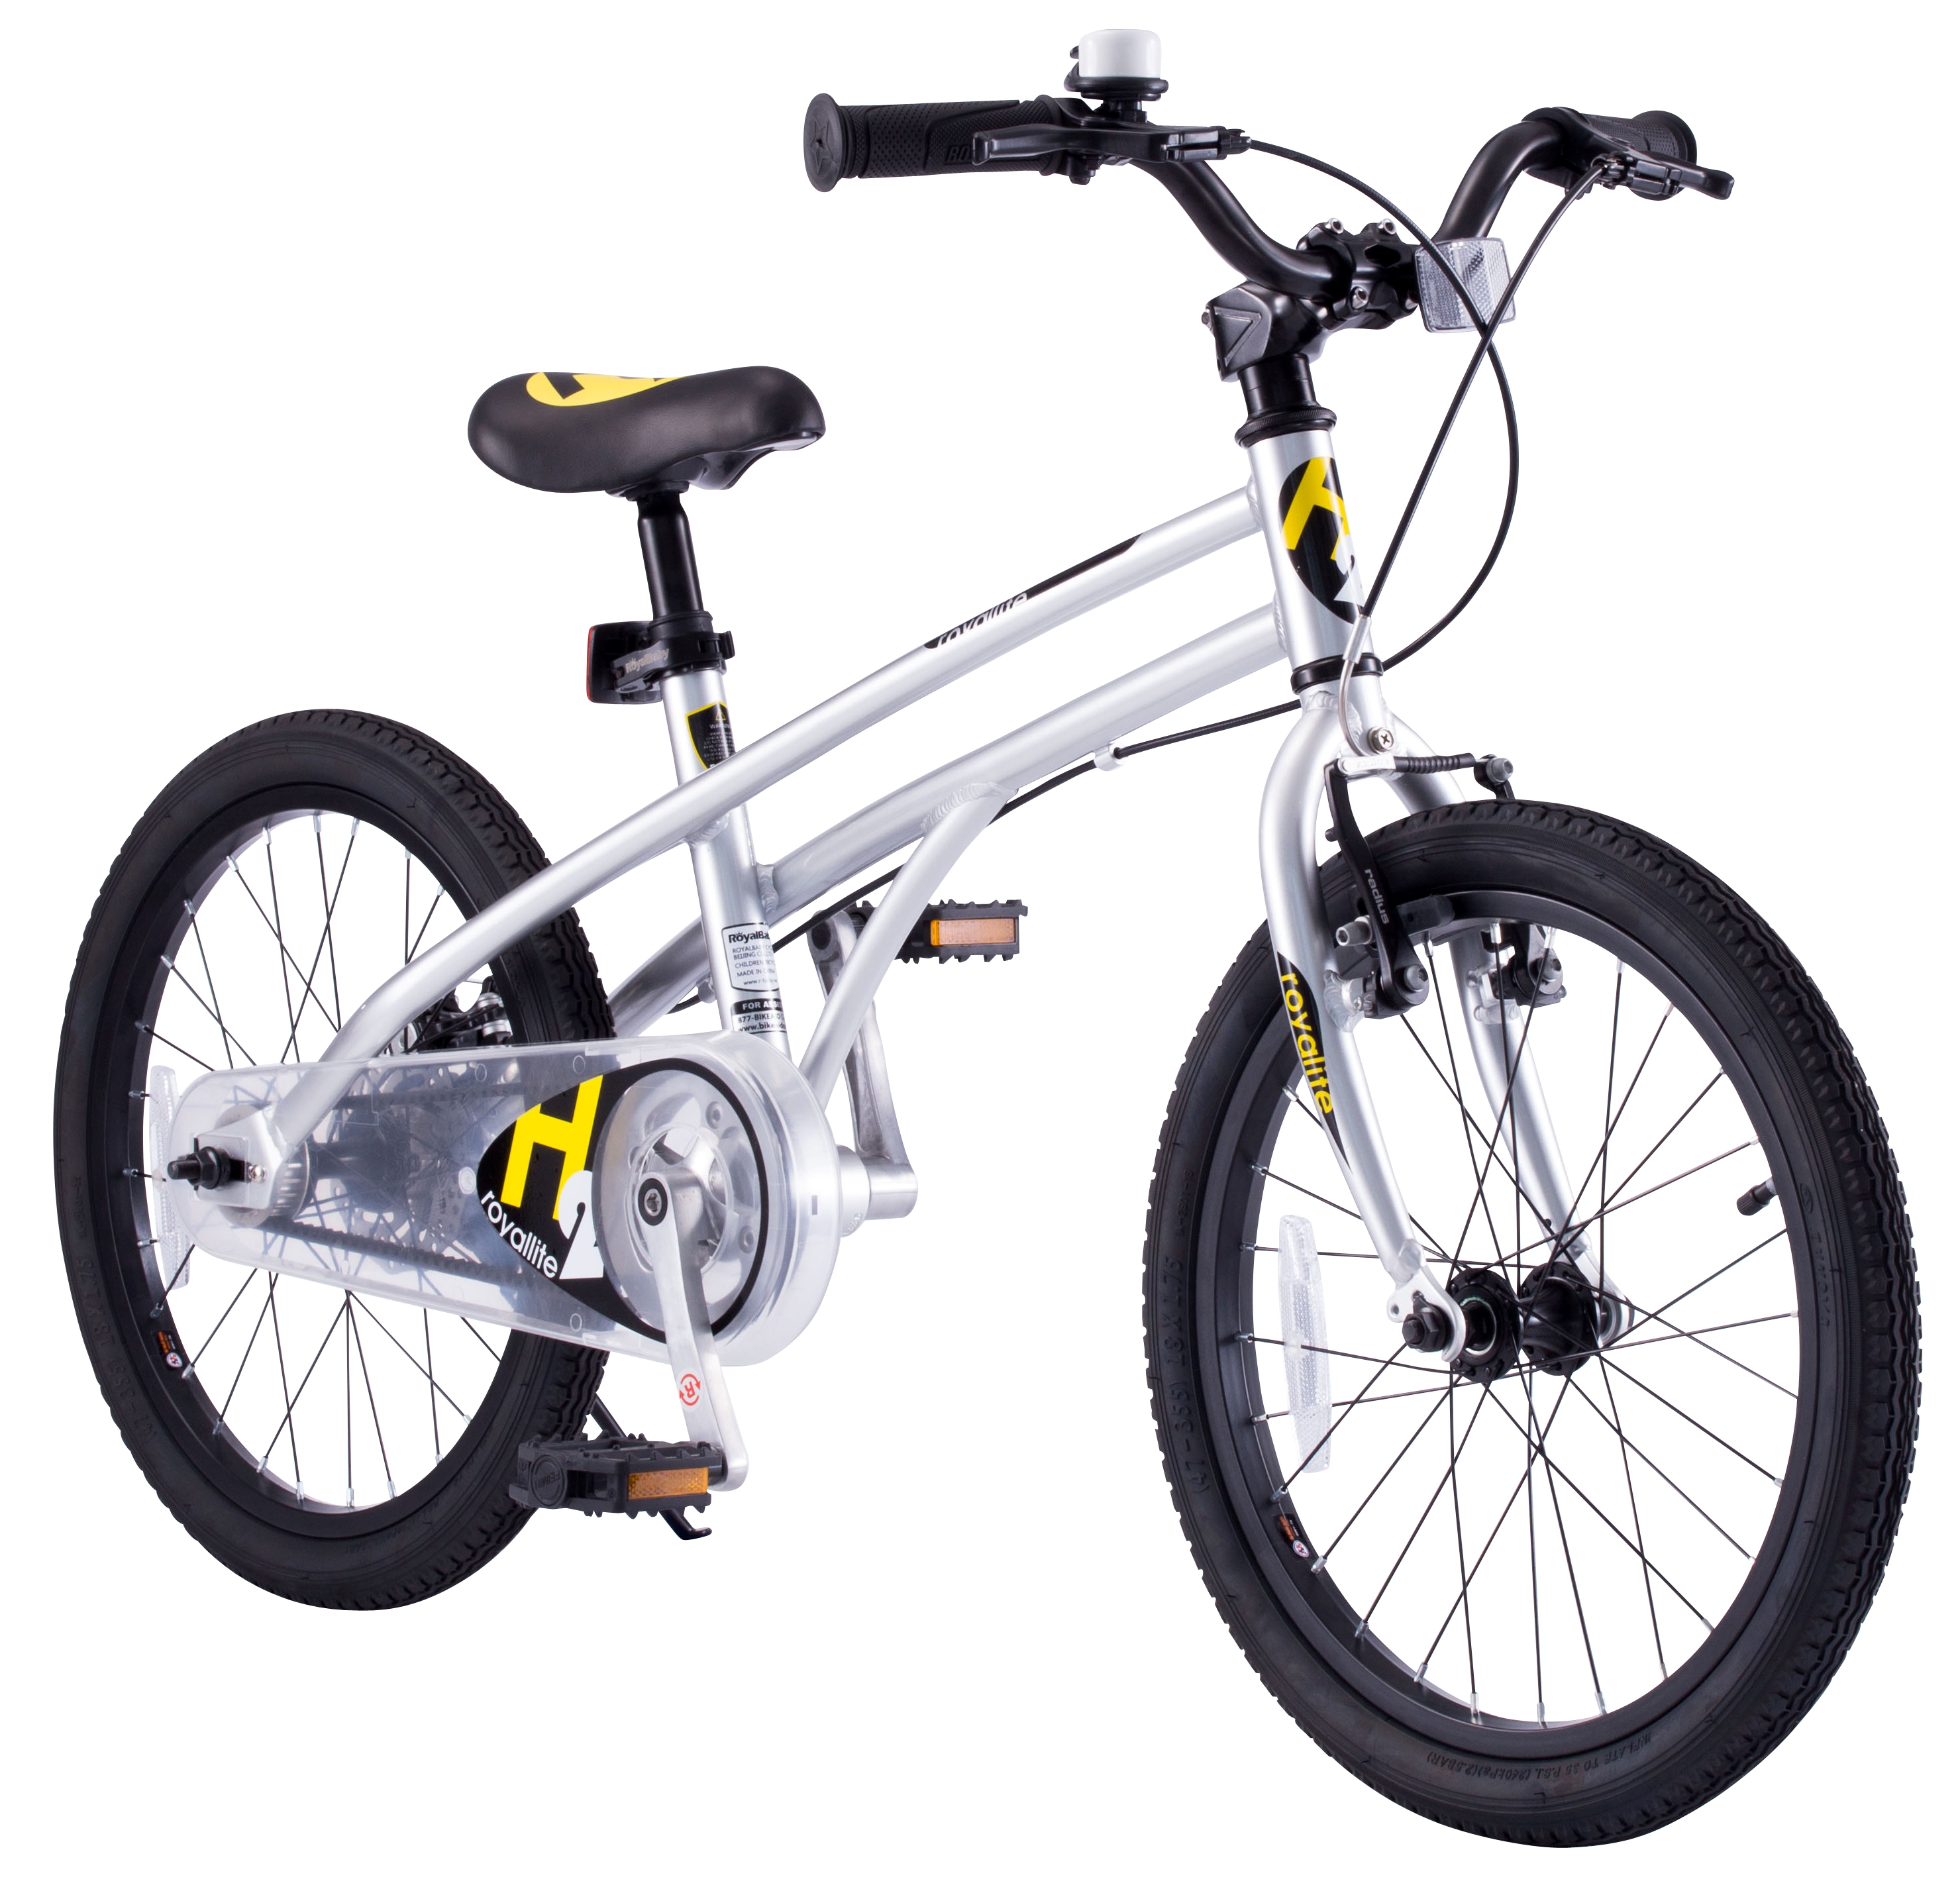 Royalbaby RoyalBaby H2 Super Light Alloy 18 Inch Kids Bicycle Age 4 - 6, Silver and Yellow - image 3 of 5